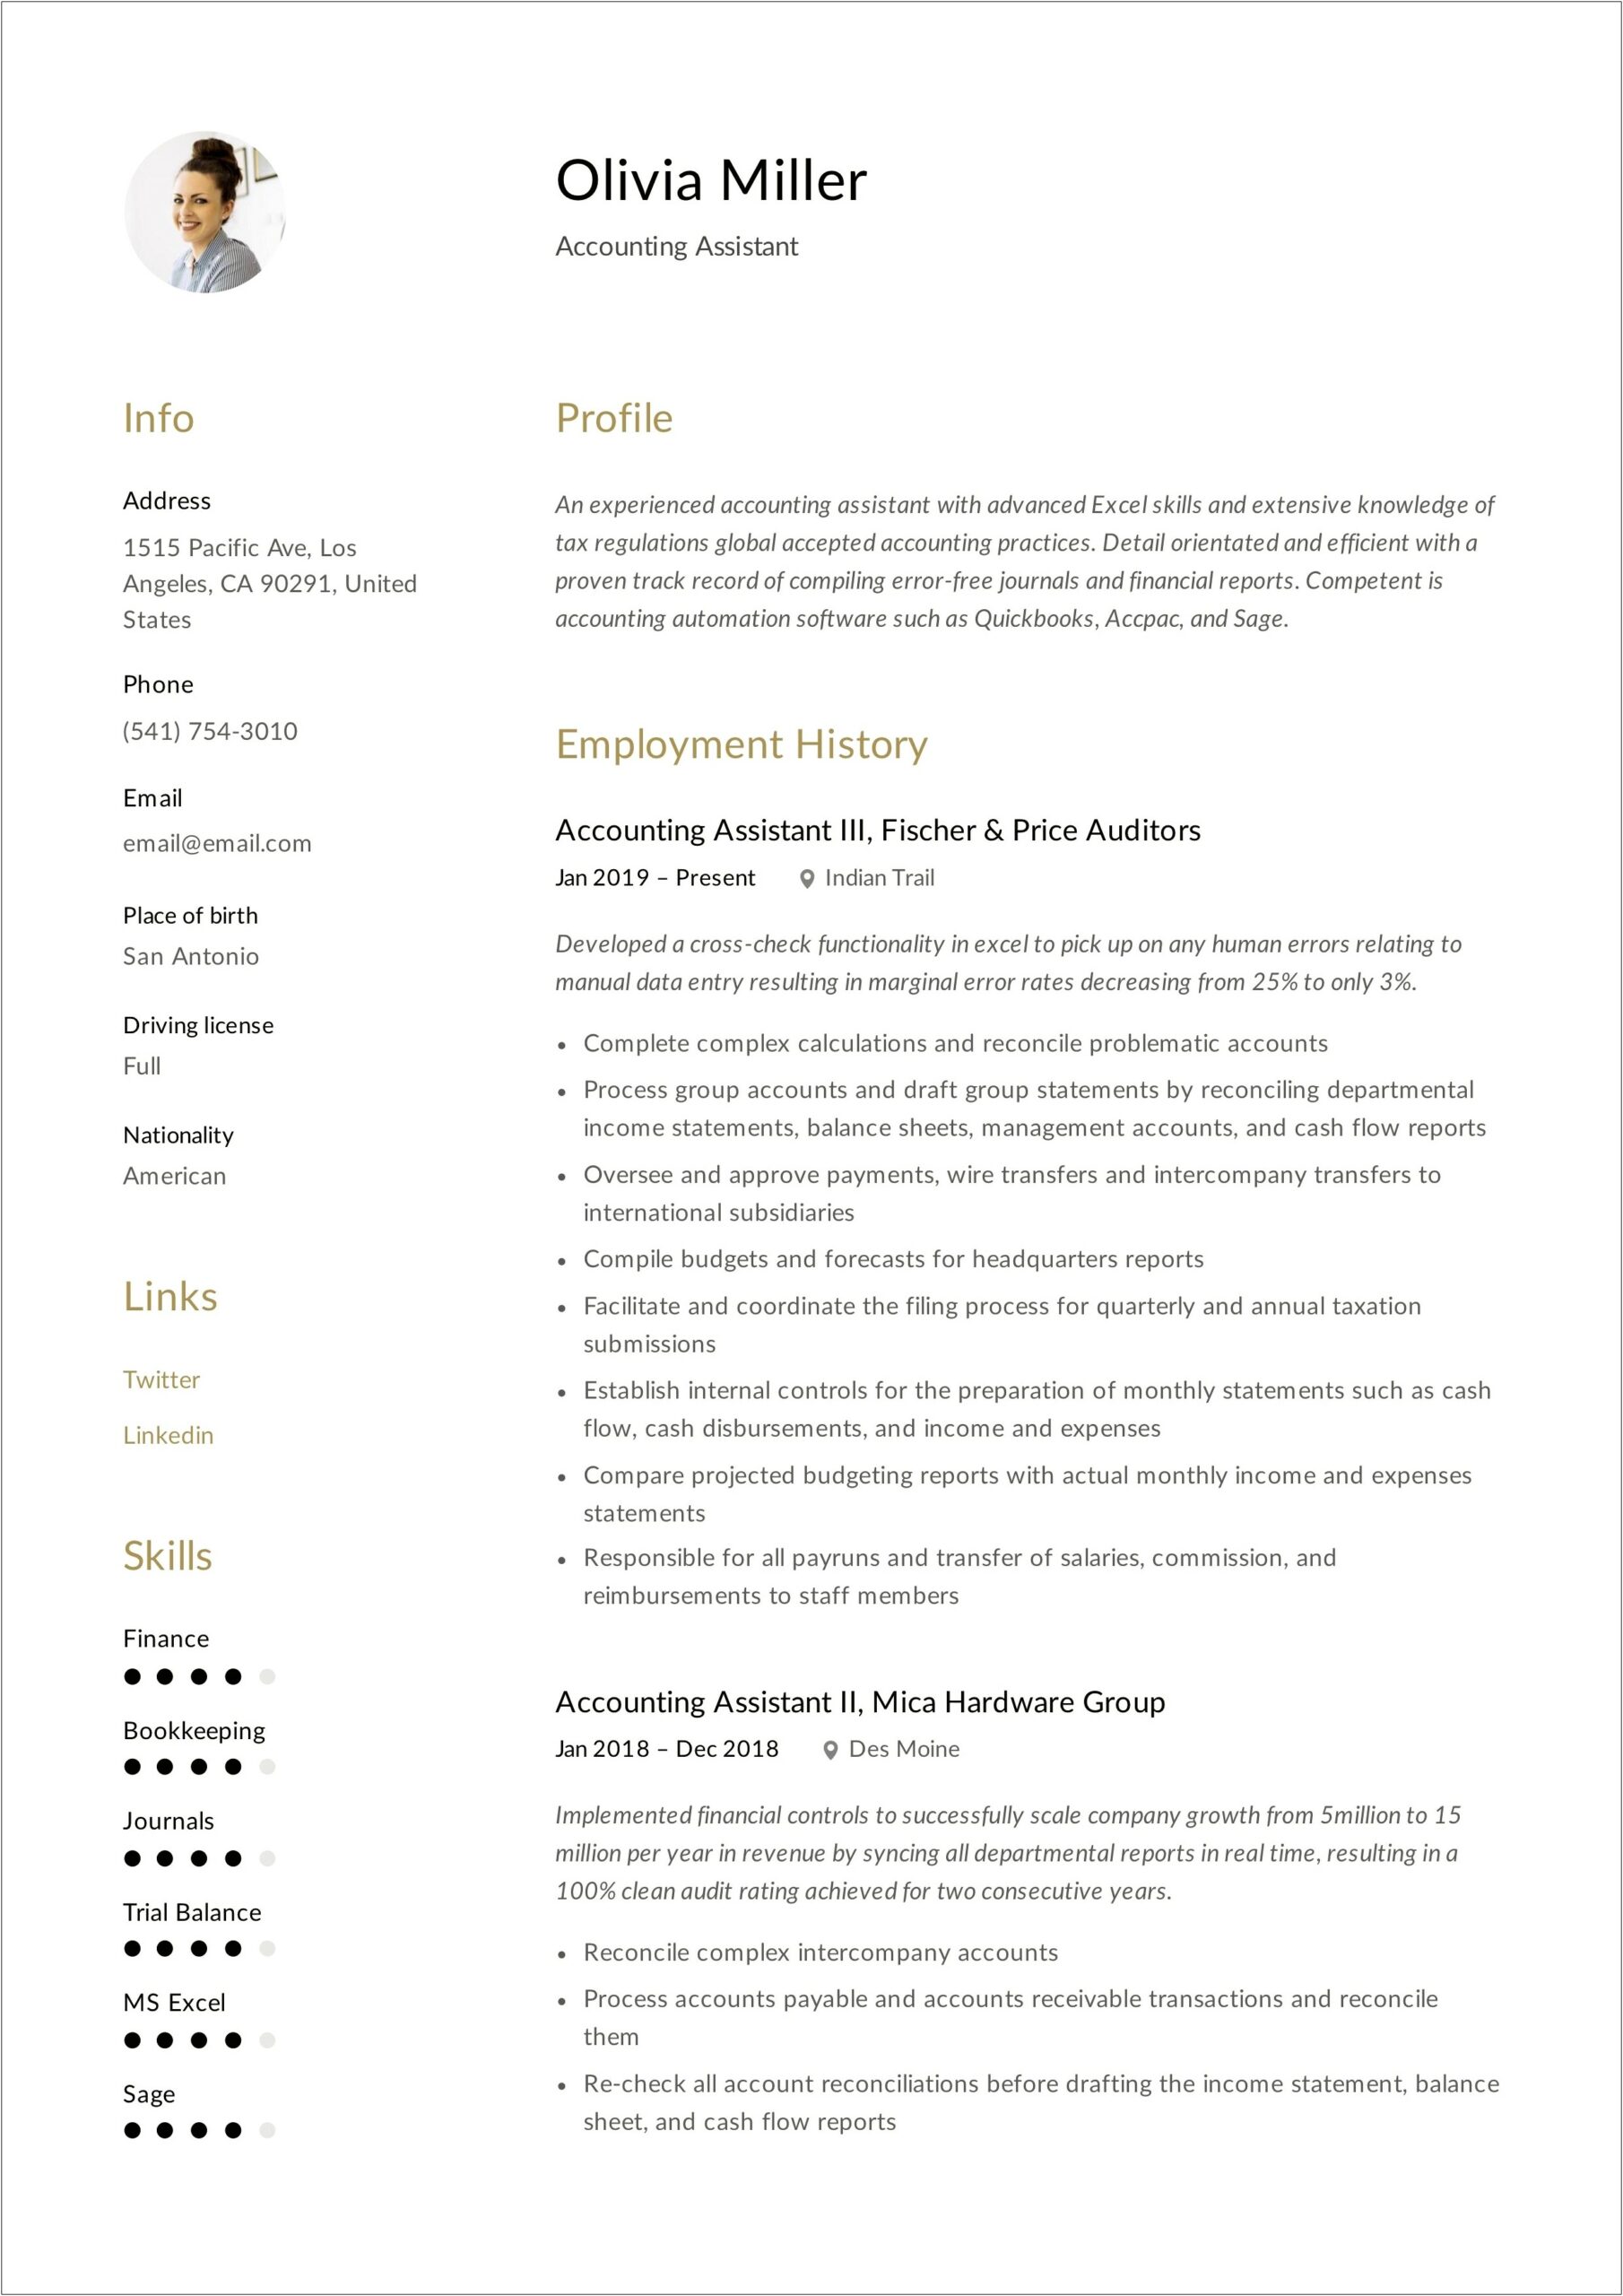 Resume Skills For Accounting Assistant